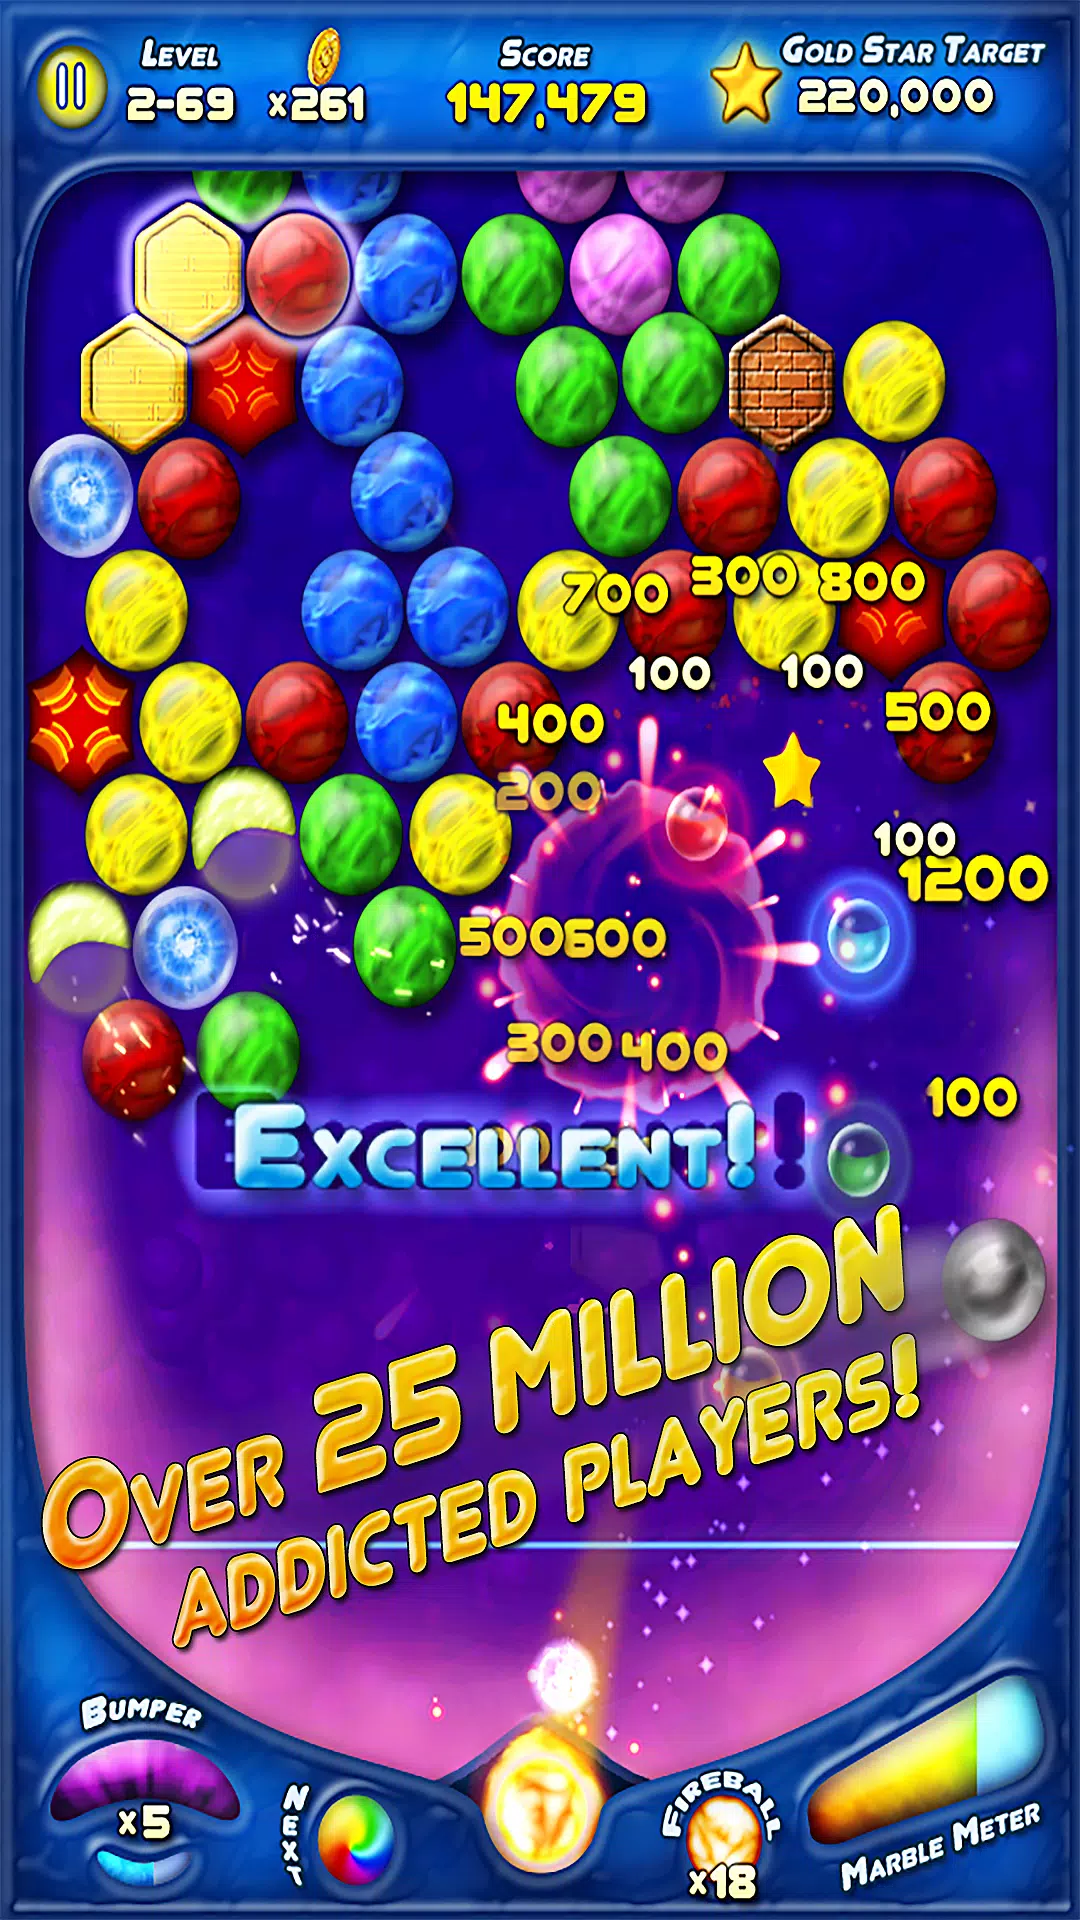 HIGHSCORE! Bubble Charms Playthrough